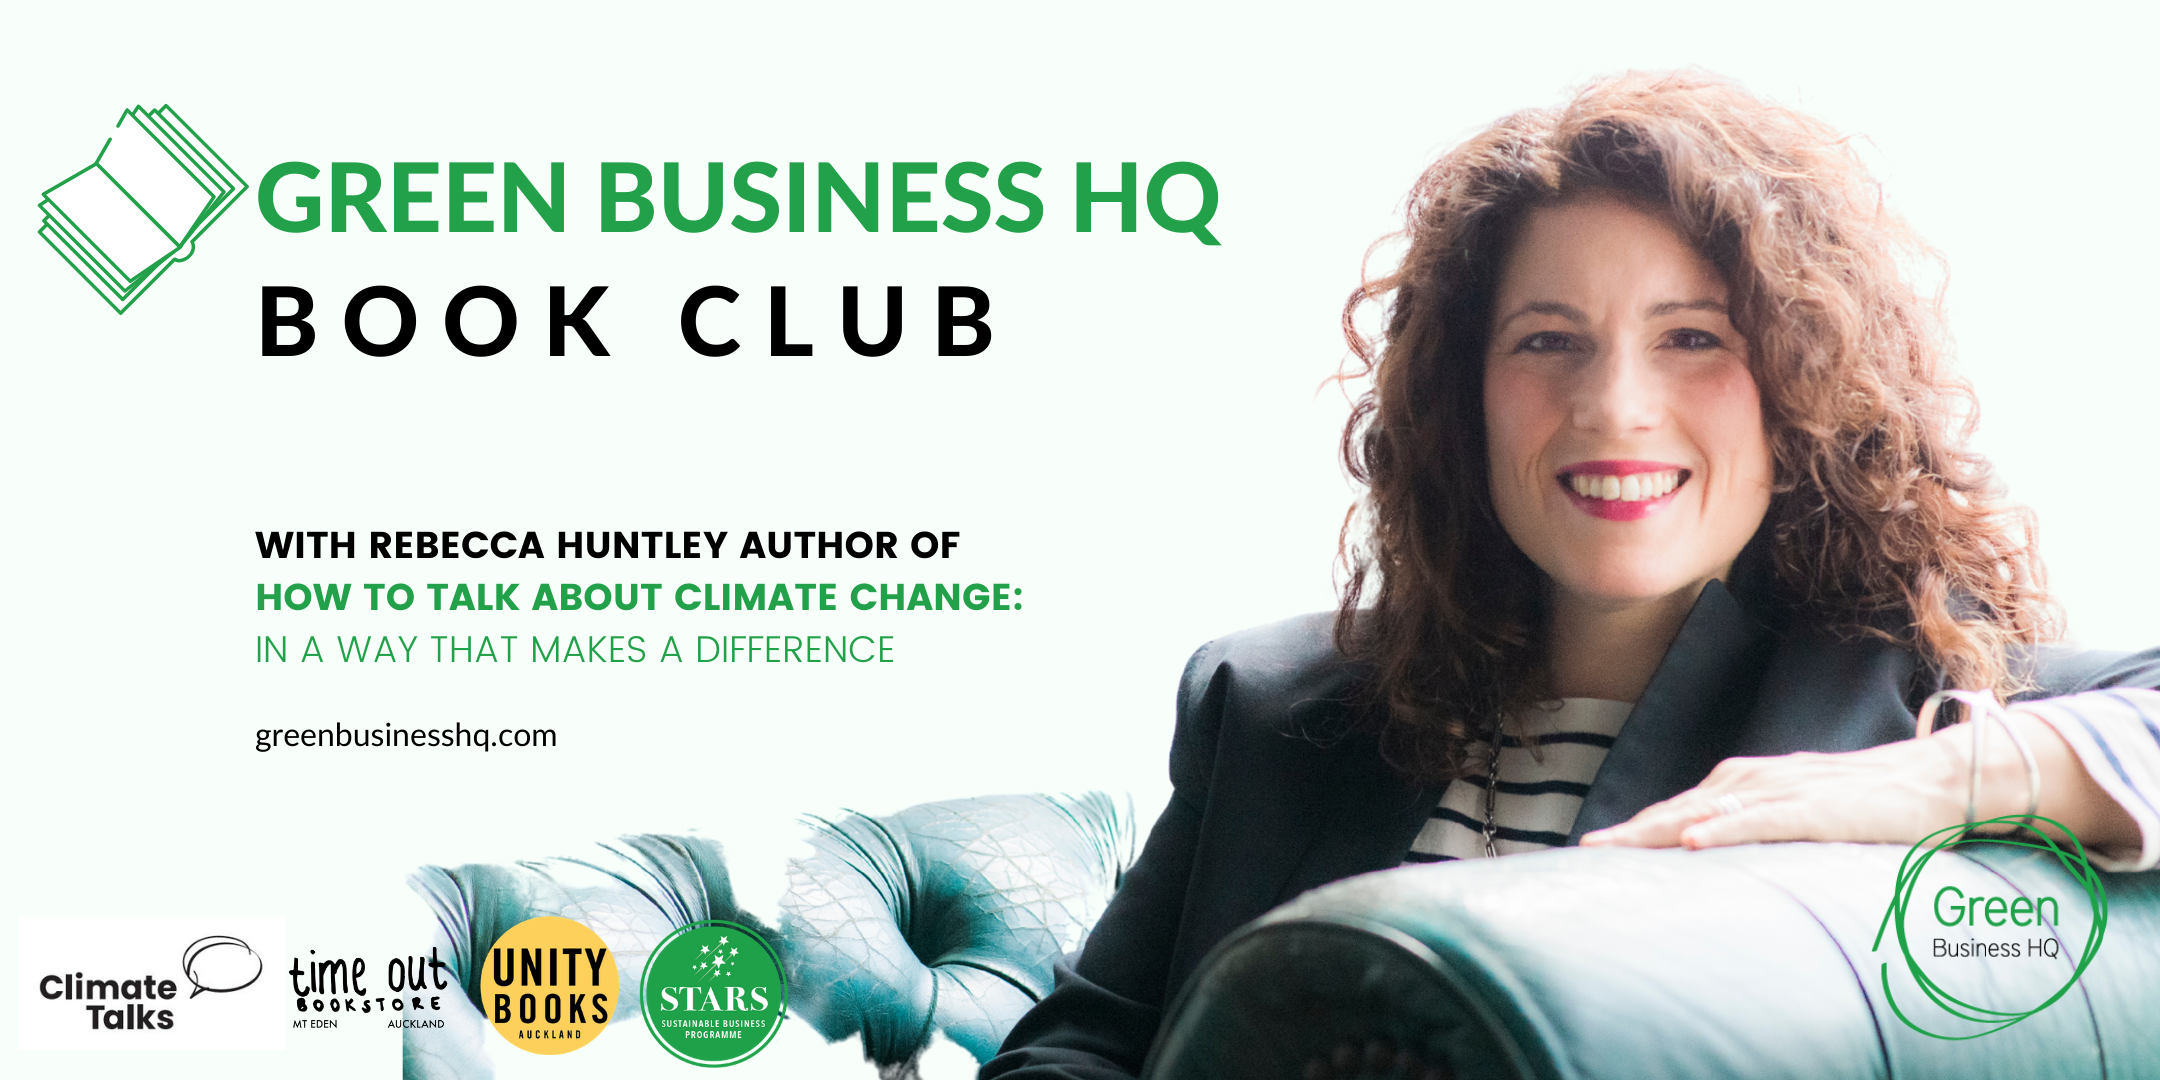 Image of author Rebecca Huntley for Green Business HQ book club 20 Oct 2020